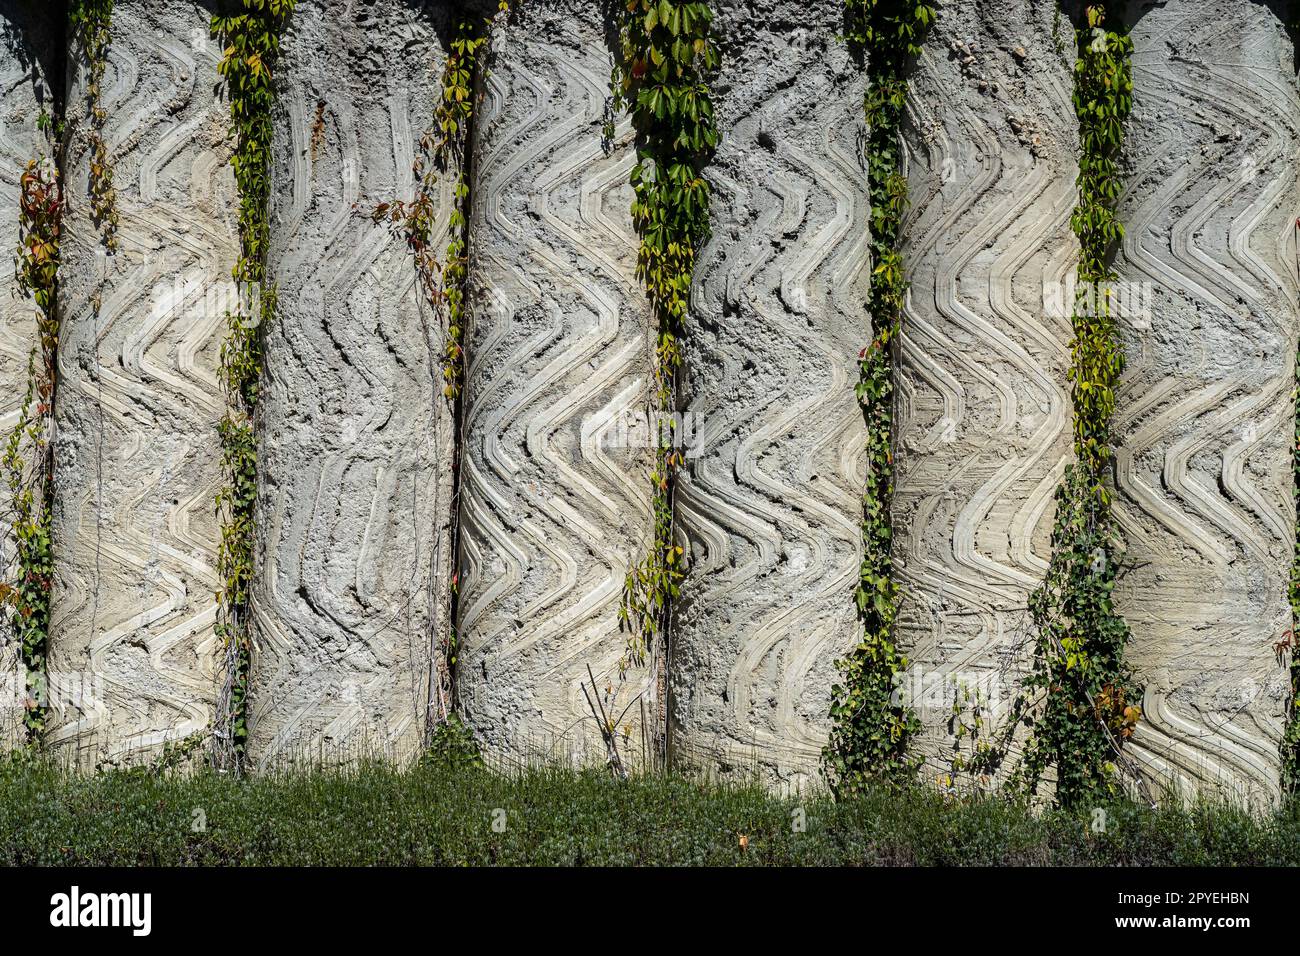 Artful wall made of congrete columns outside Stock Photo